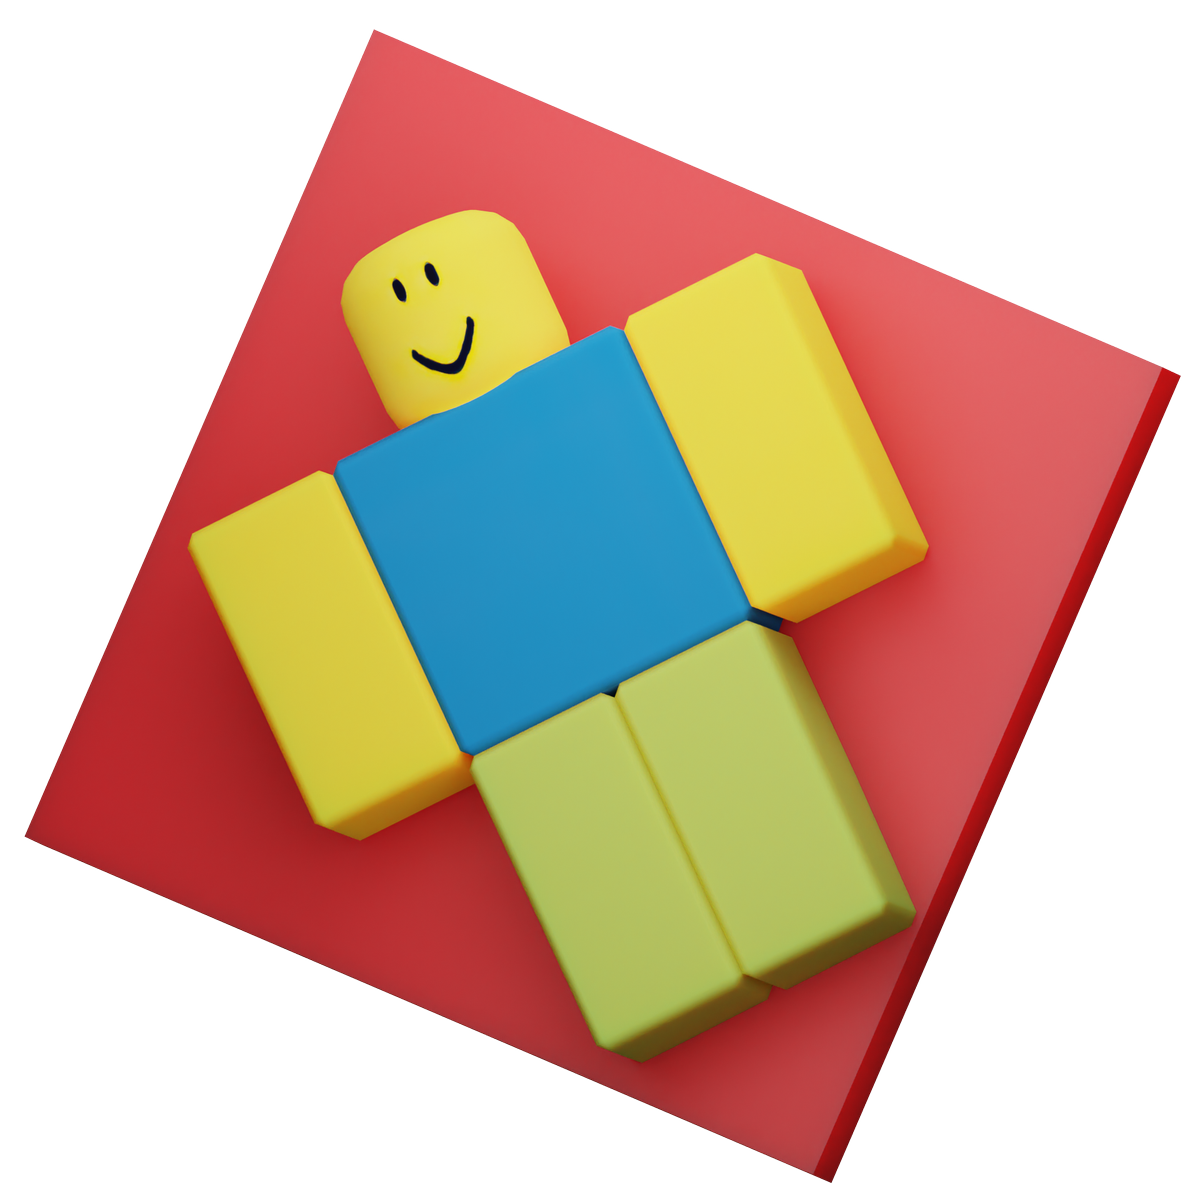 Hans On Twitter Did Two More Icons One For Roblox And One For Roblox Studio Wasn T Really Sure How Else I Could Ve Done It Roblox Robloxdev Https T Co 1yonk8y63v - cool roblox studio icon